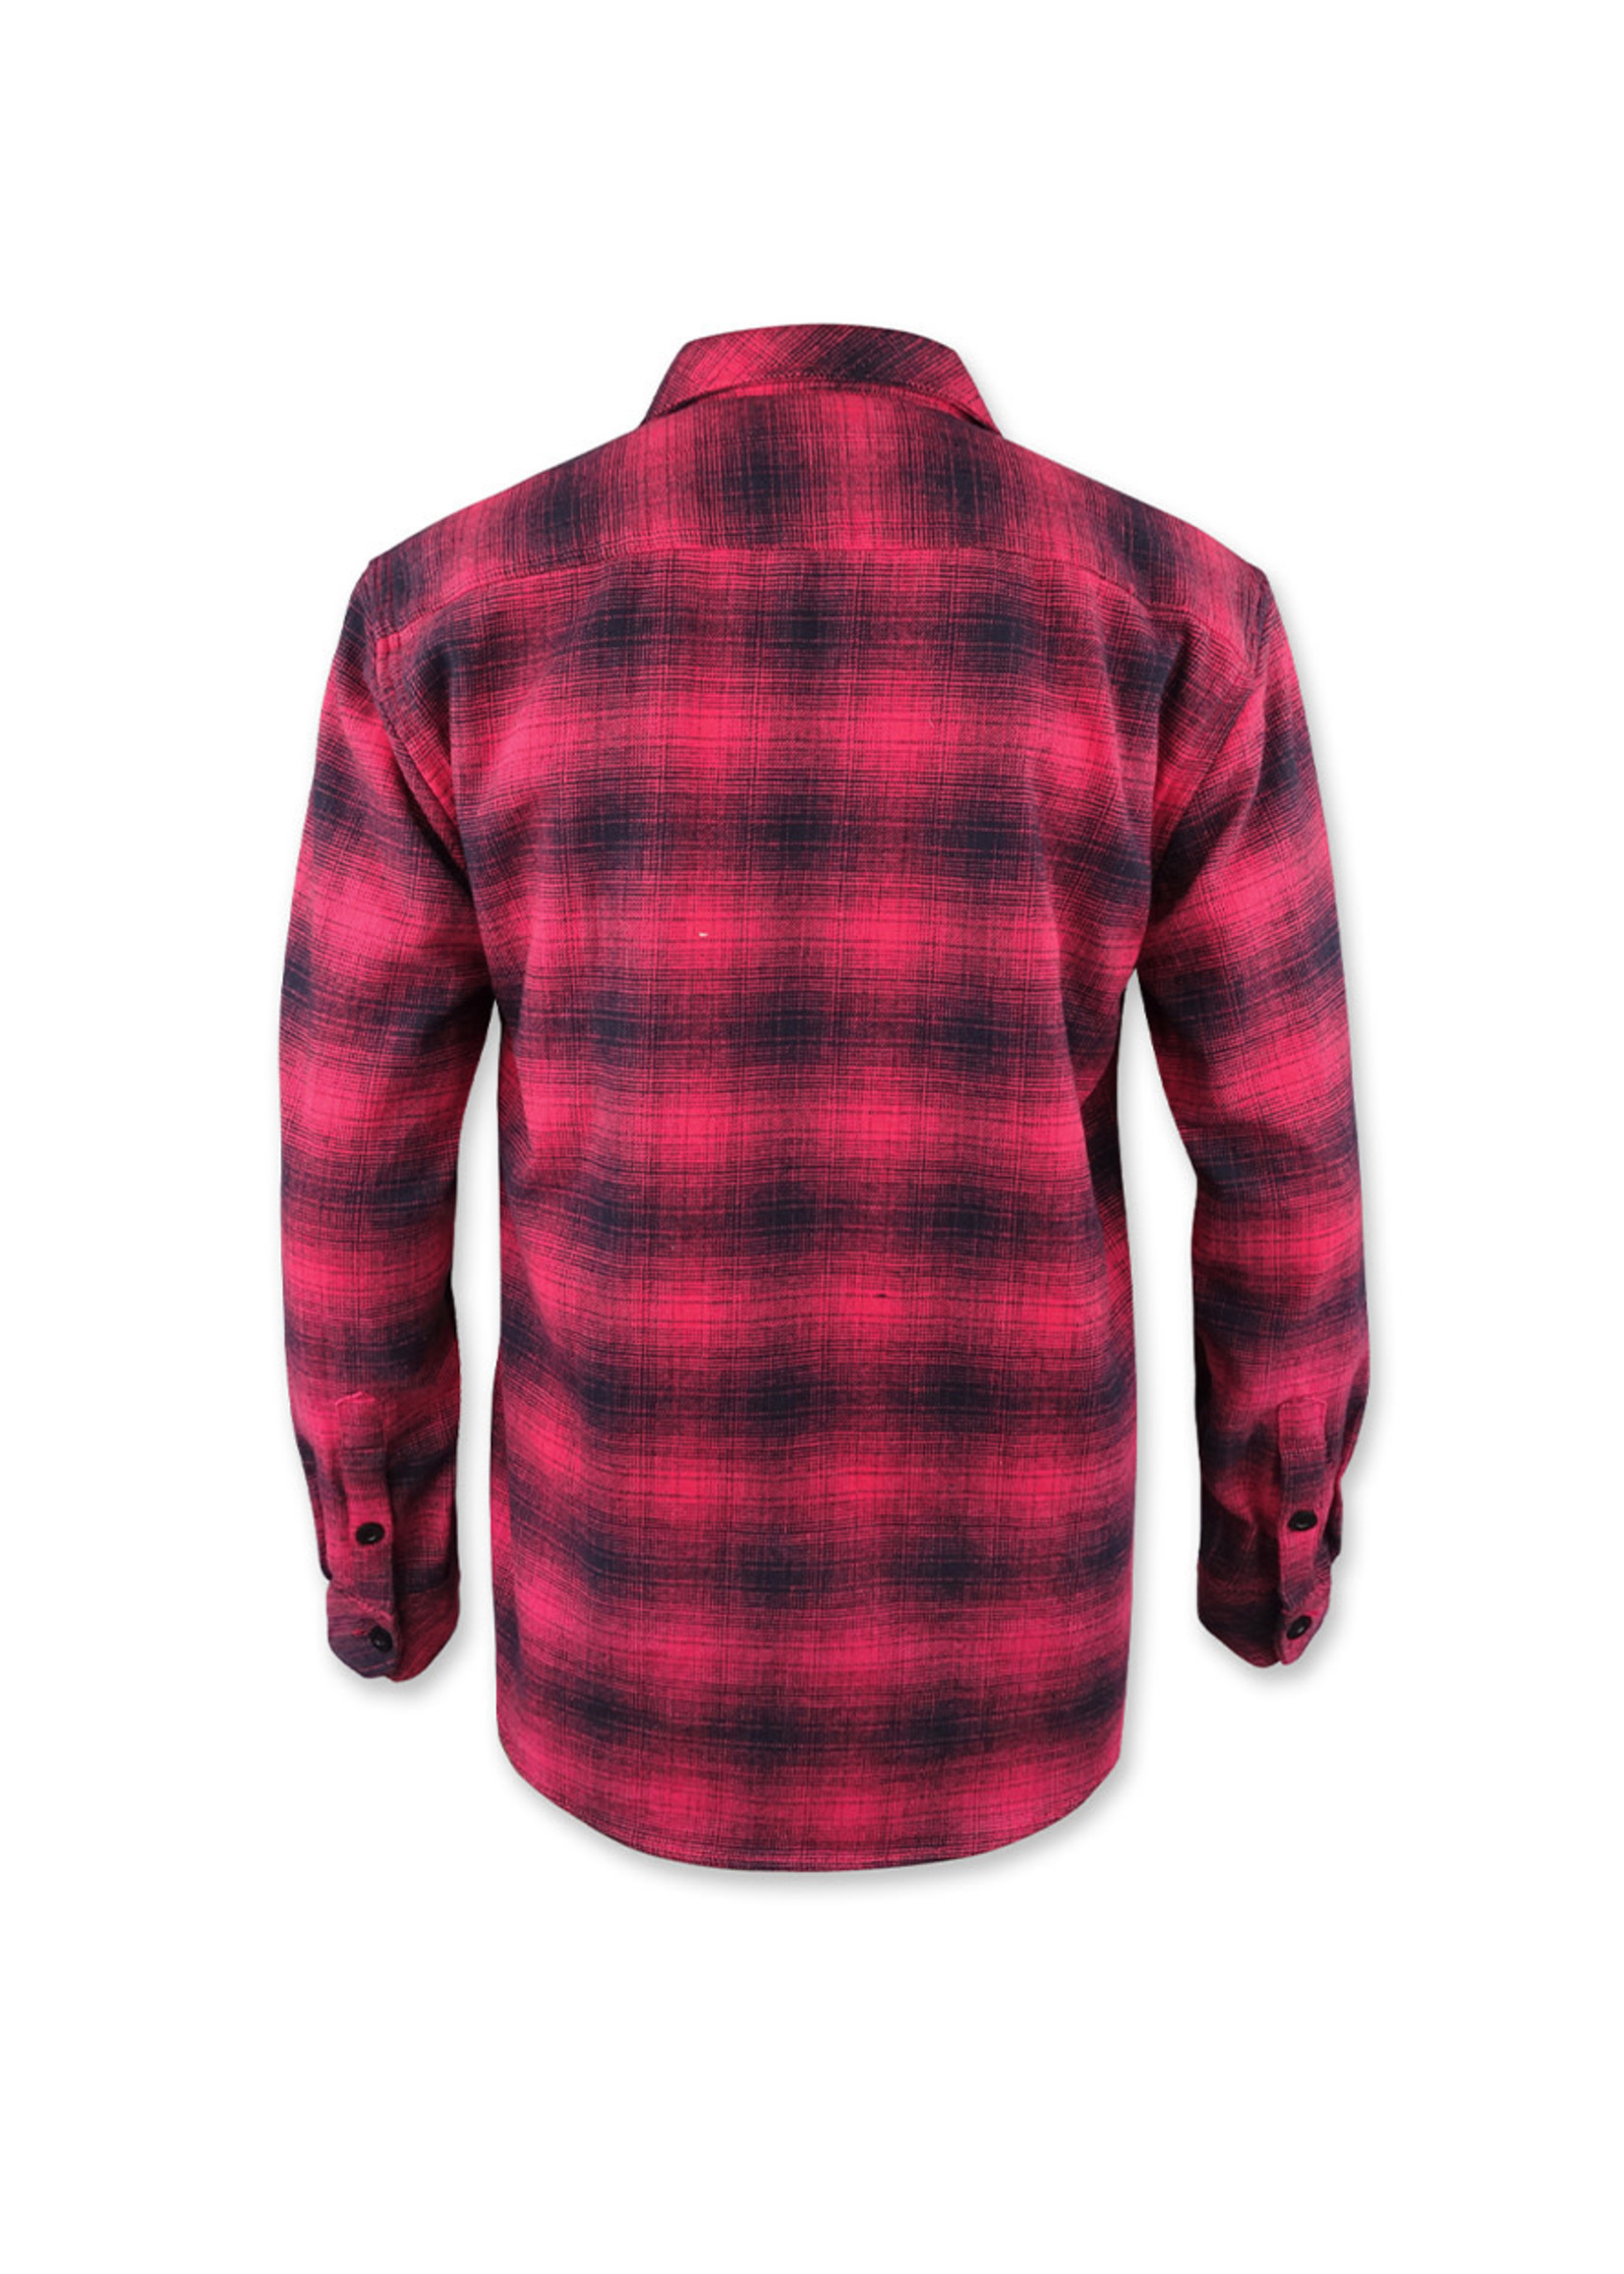 Loose Riders Loose Riders Men's Flannel Shirt